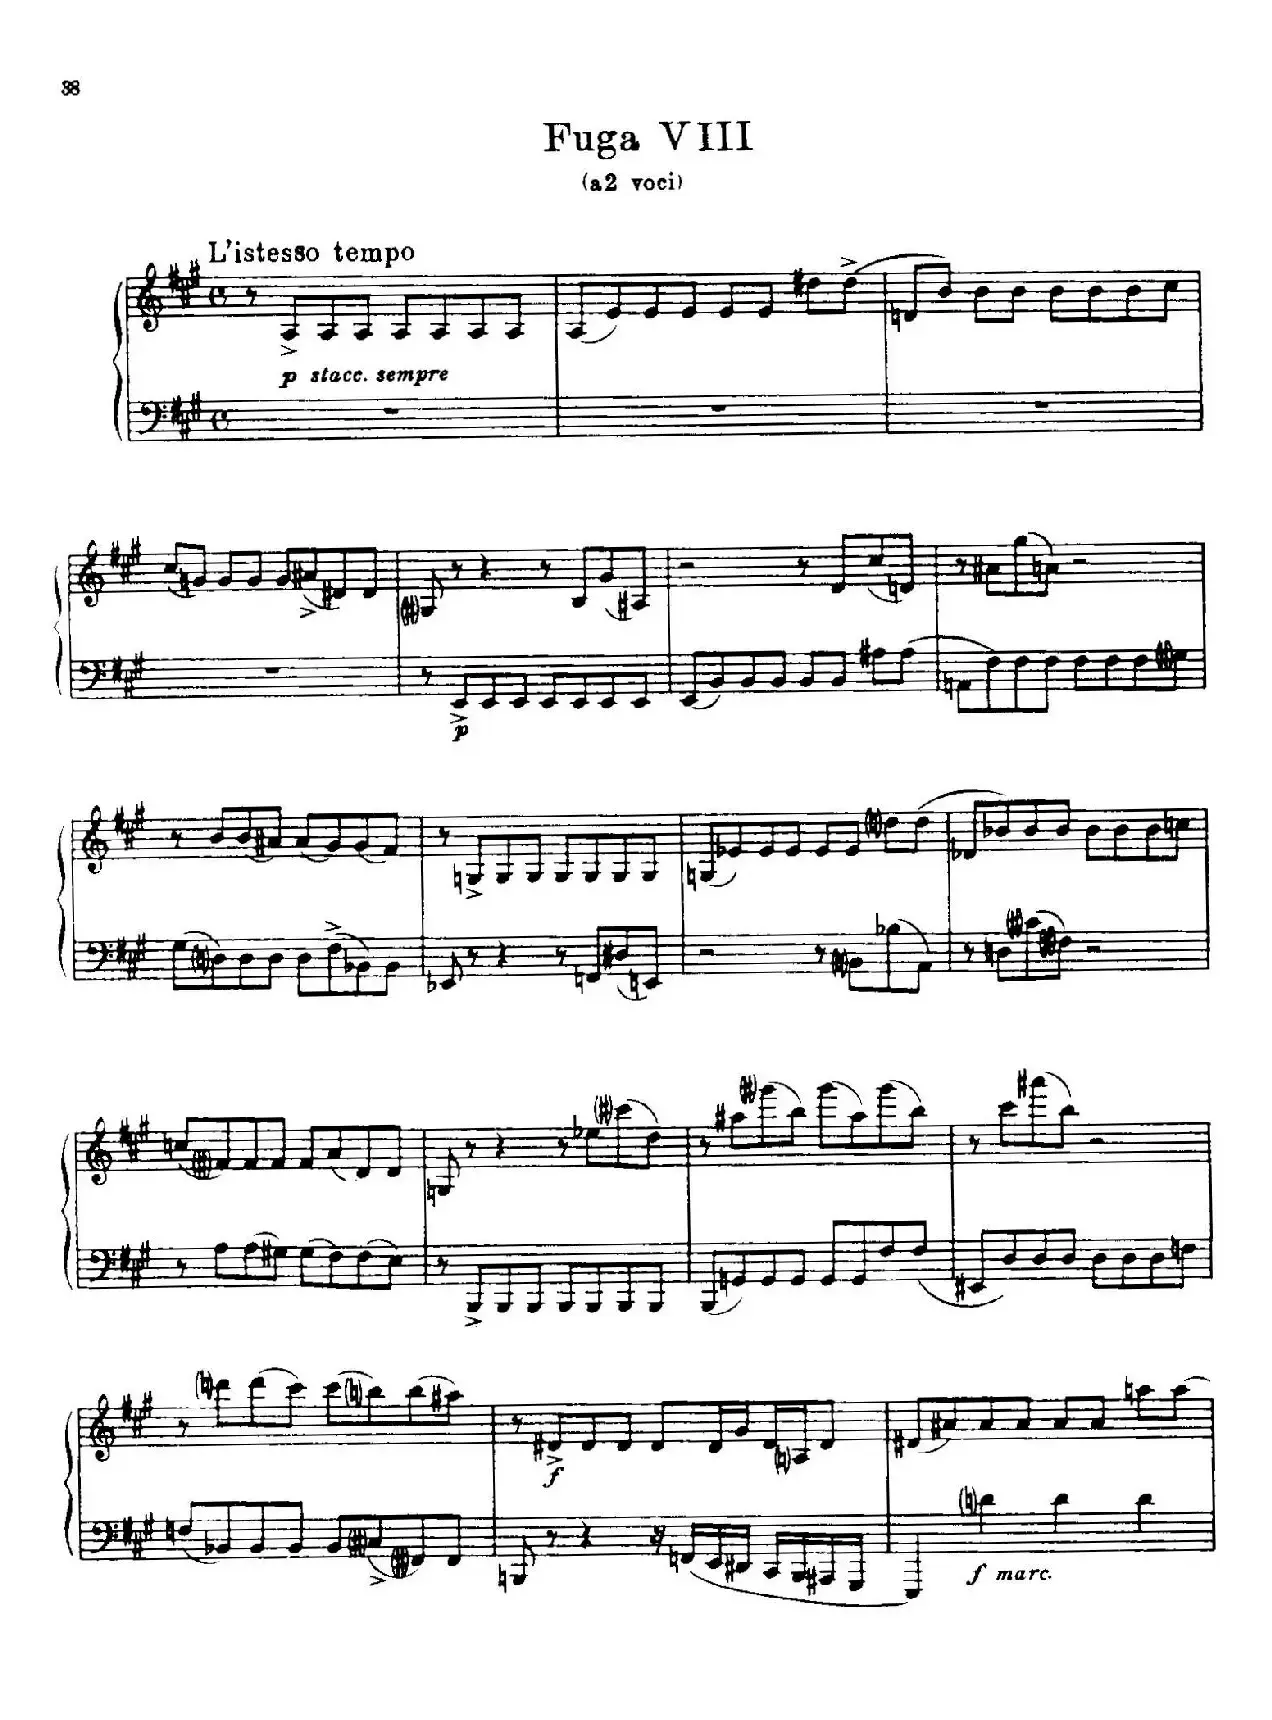 24 Preludes and Fugues Part.1 Op.45（24首前奏曲与赋格·第一部分·7）